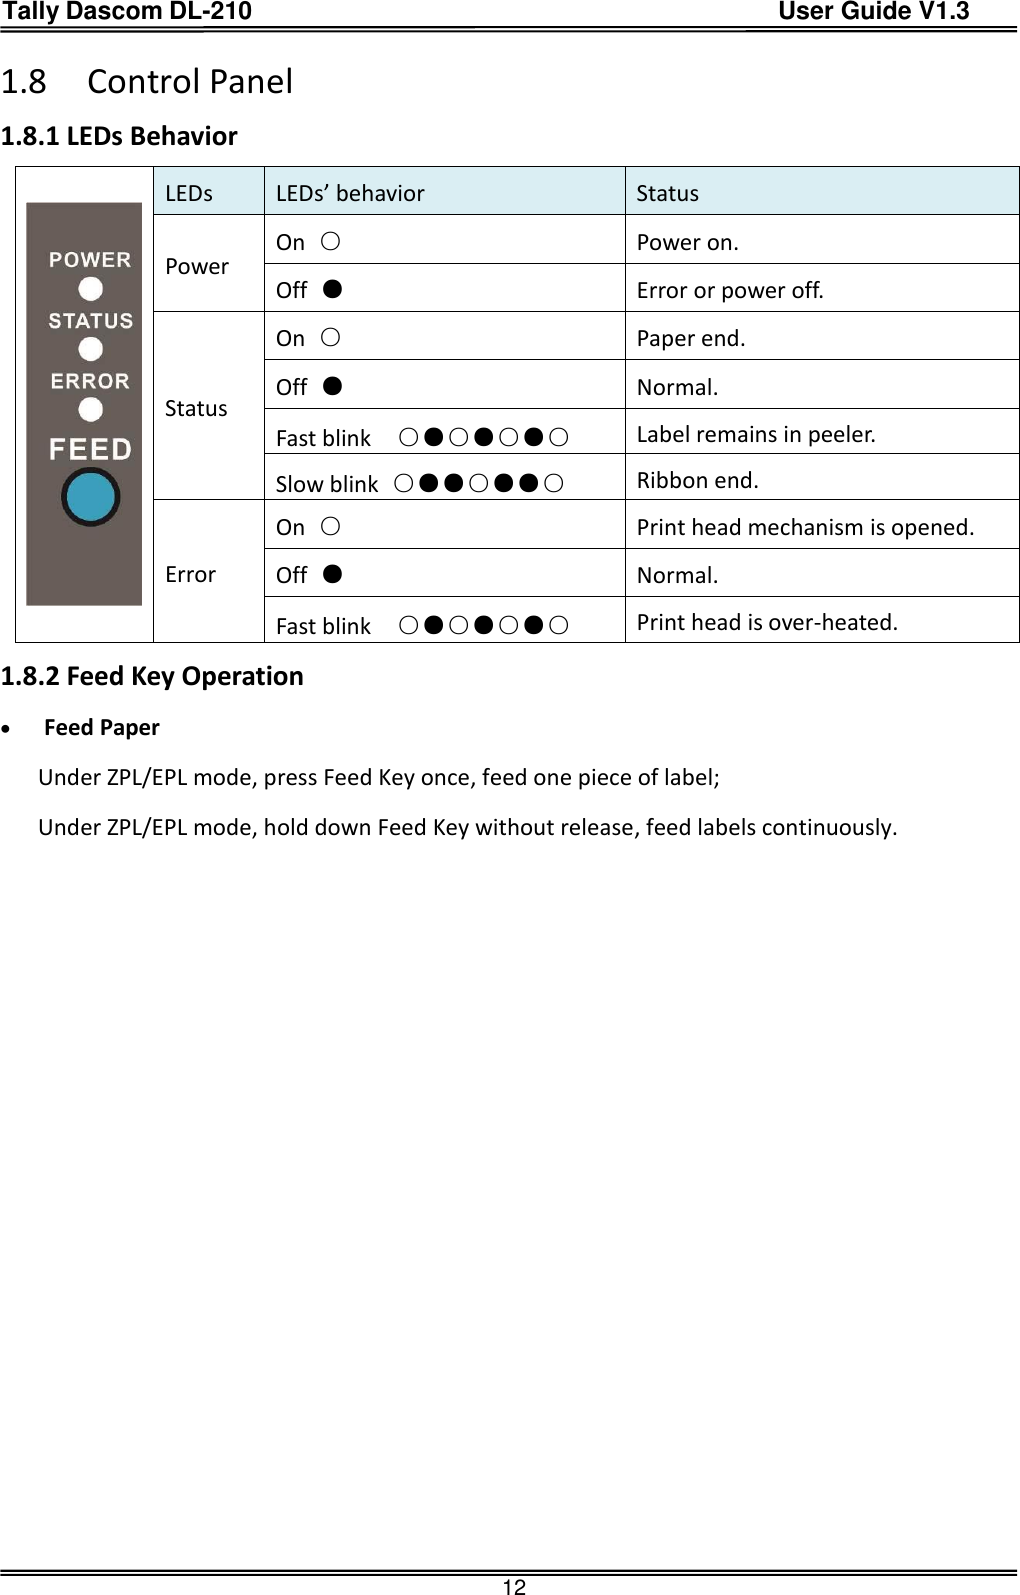 Tally Dascom DL-210                                          User Guide V1.3  12 1.8 Control Panel 1.8.1 LEDs Behavior  LEDs LEDs’ behavior Status Power On ○ Power on. Off  ● Error or power off. Status On ○ Paper end. Off  ● Normal. Fast blink    ○●○●○●○ Label remains in peeler. Slow blink  ○●●○●●○ Ribbon end. Error On ○ Print head mechanism is opened. Off  ● Normal. Fast blink    ○●○●○●○ Print head is over-heated. 1.8.2 Feed Key Operation  Feed Paper Under ZPL/EPL mode, press Feed Key once, feed one piece of label; Under ZPL/EPL mode, hold down Feed Key without release, feed labels continuously. 